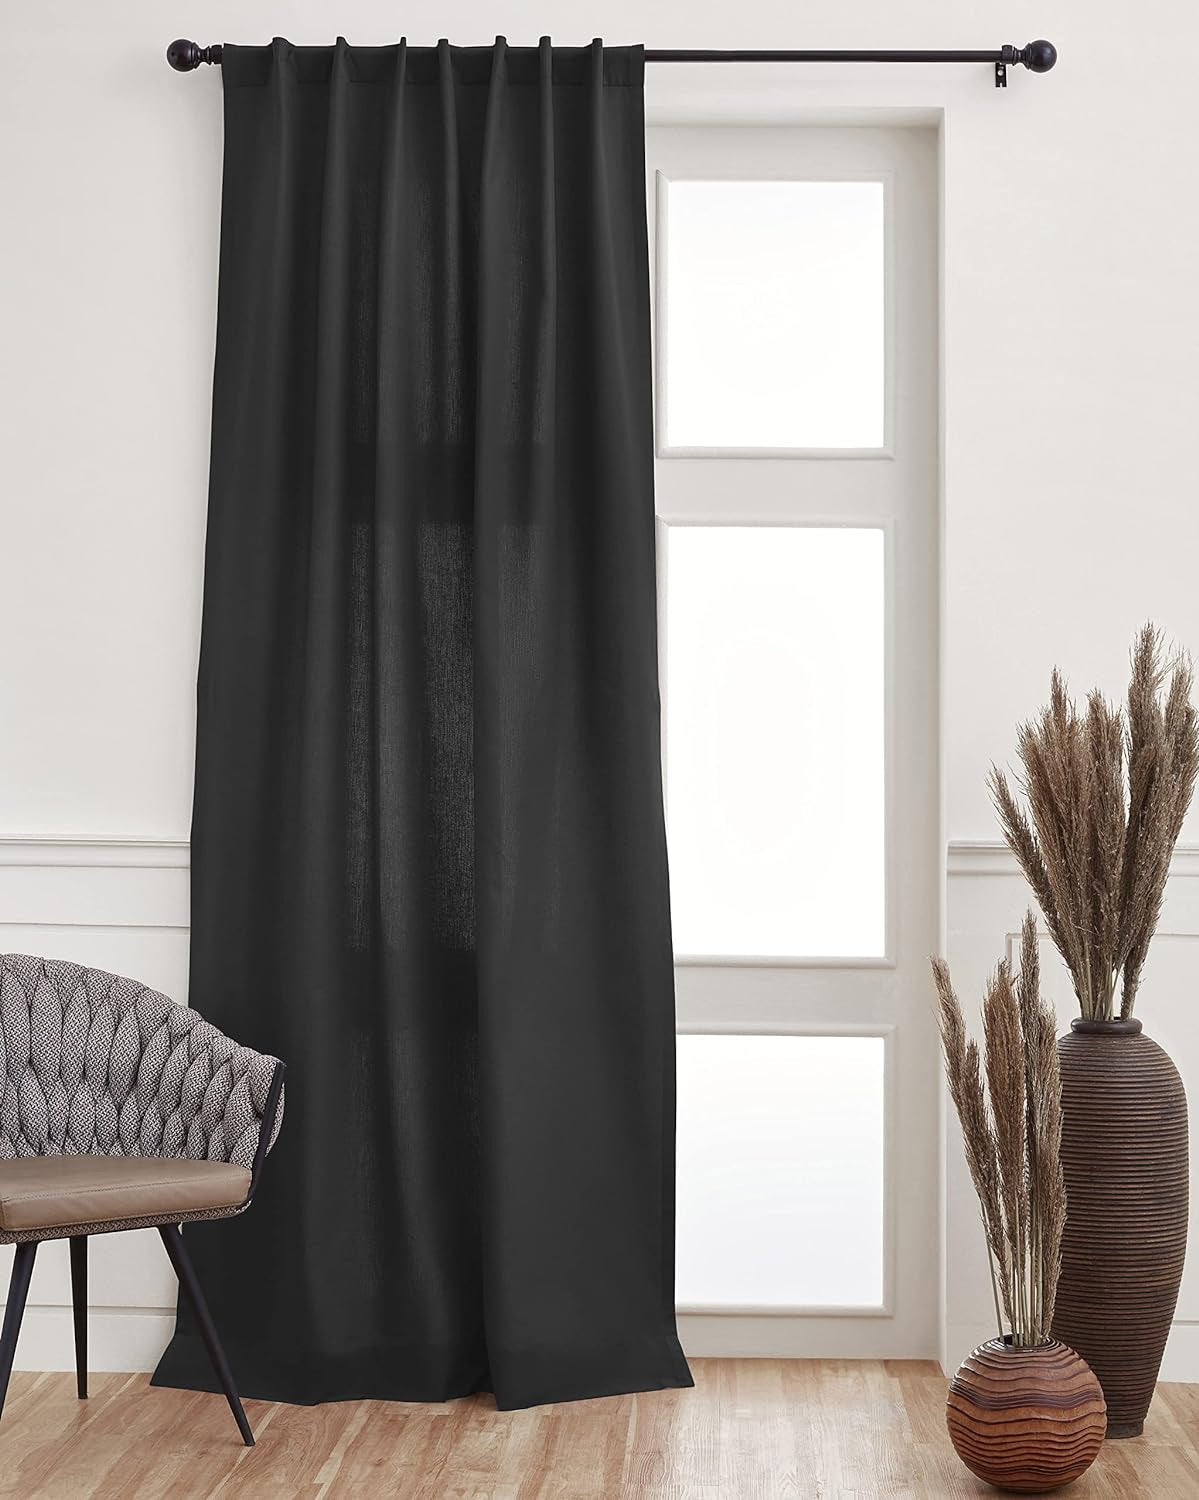 Solino Home Cotton Linen Curtain Ivory – 52 X 54 Inch Curtain with Rod Pocket and Hidden Tab – 2 in 1 Hanging Style Curtain for Living Room, Indoor, Outdoor  Solino Home Black 52 X 96 Inch 